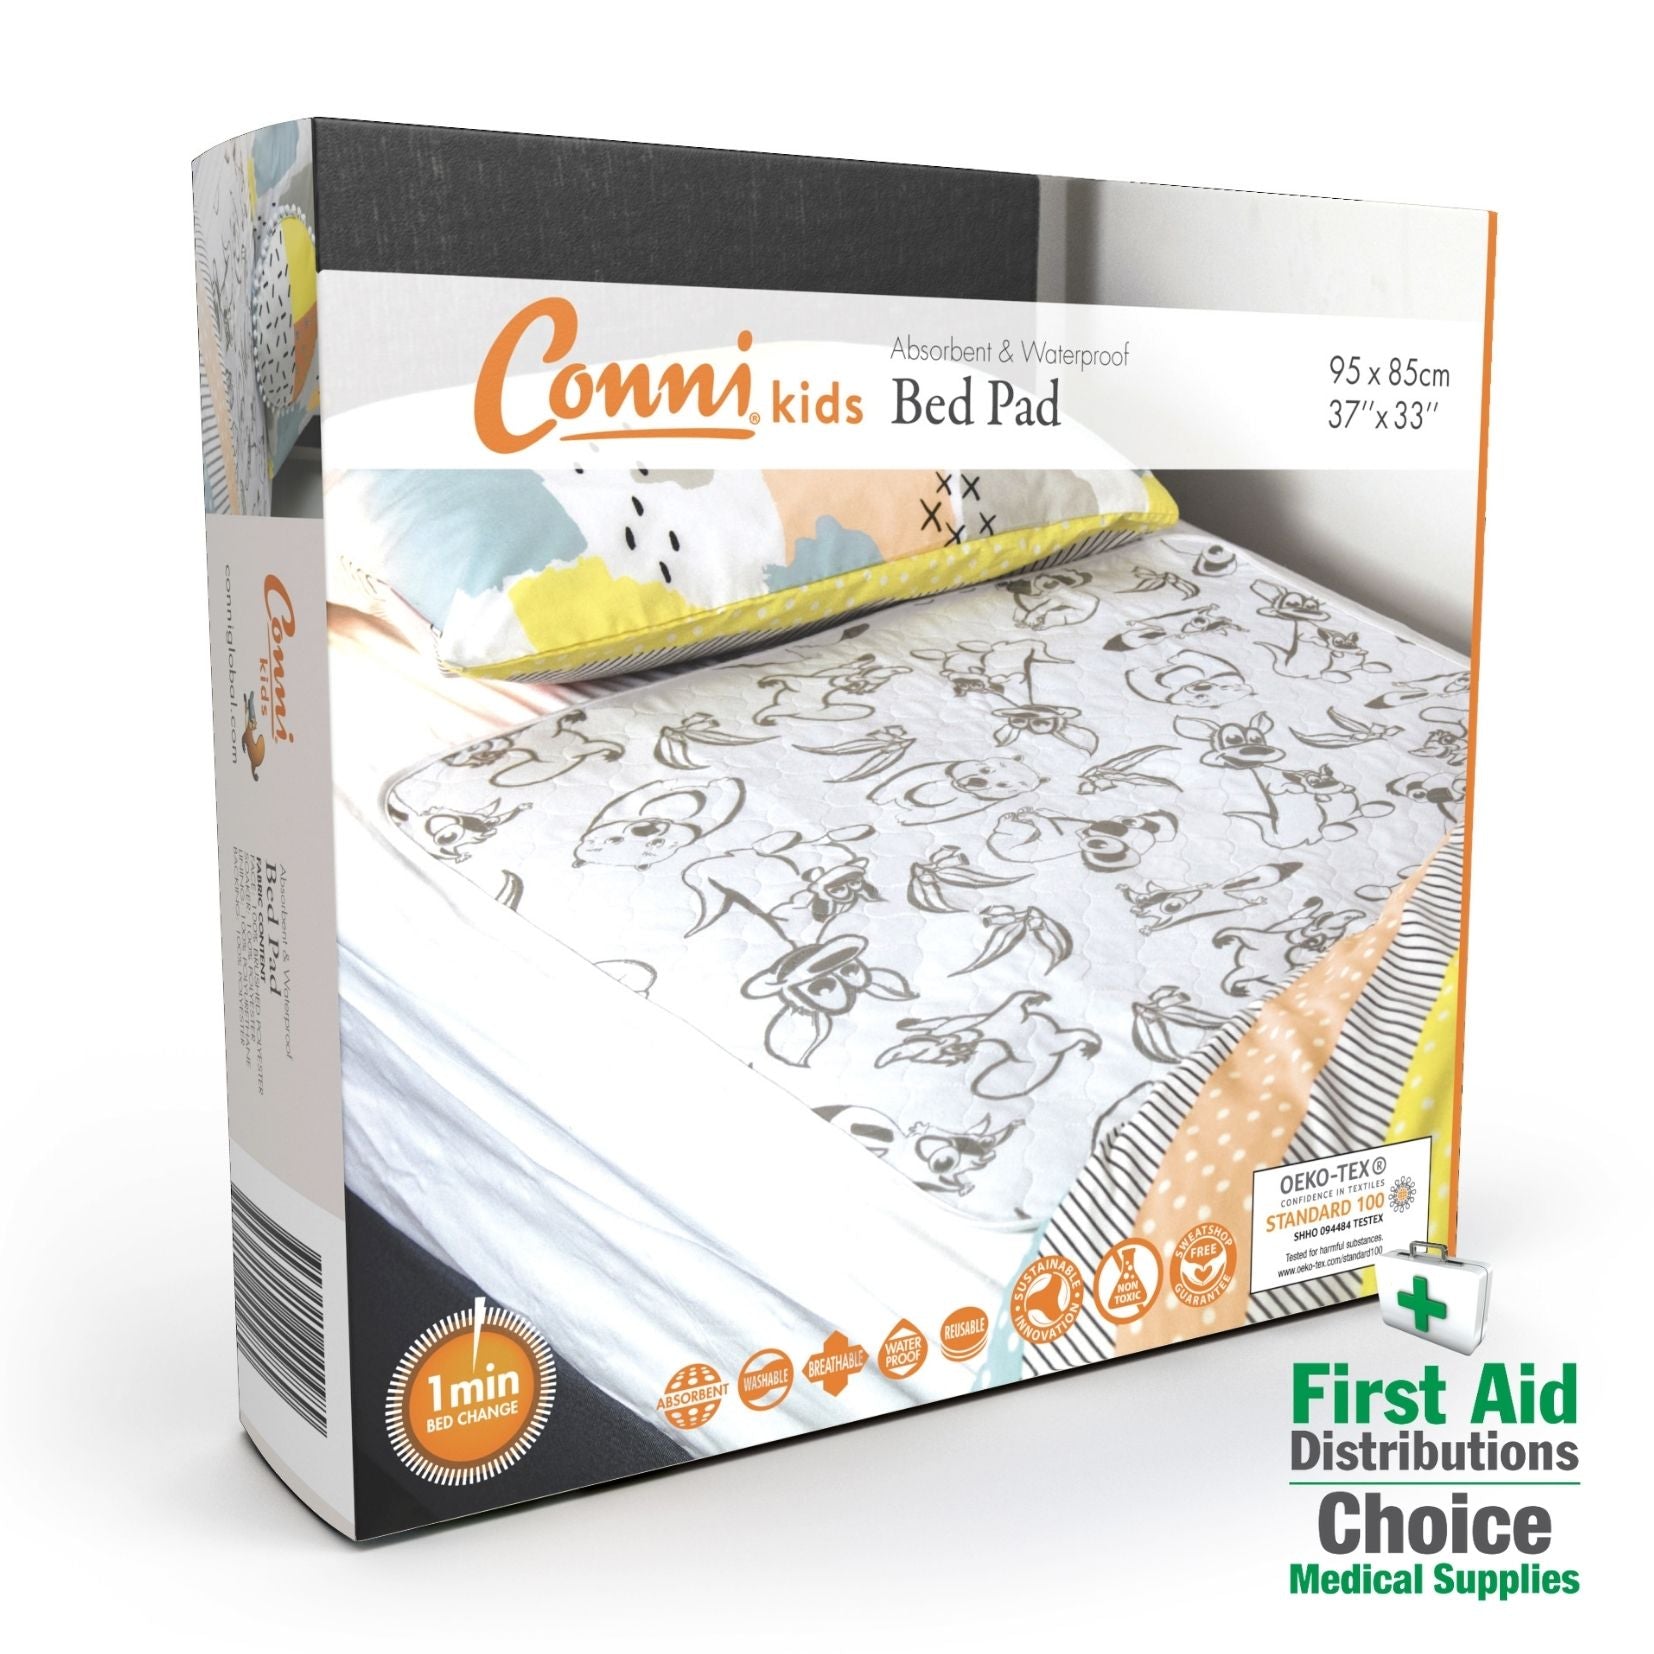 collections/Conni_Kids_Bed_Pad_First_Aid_Distributions.jpg